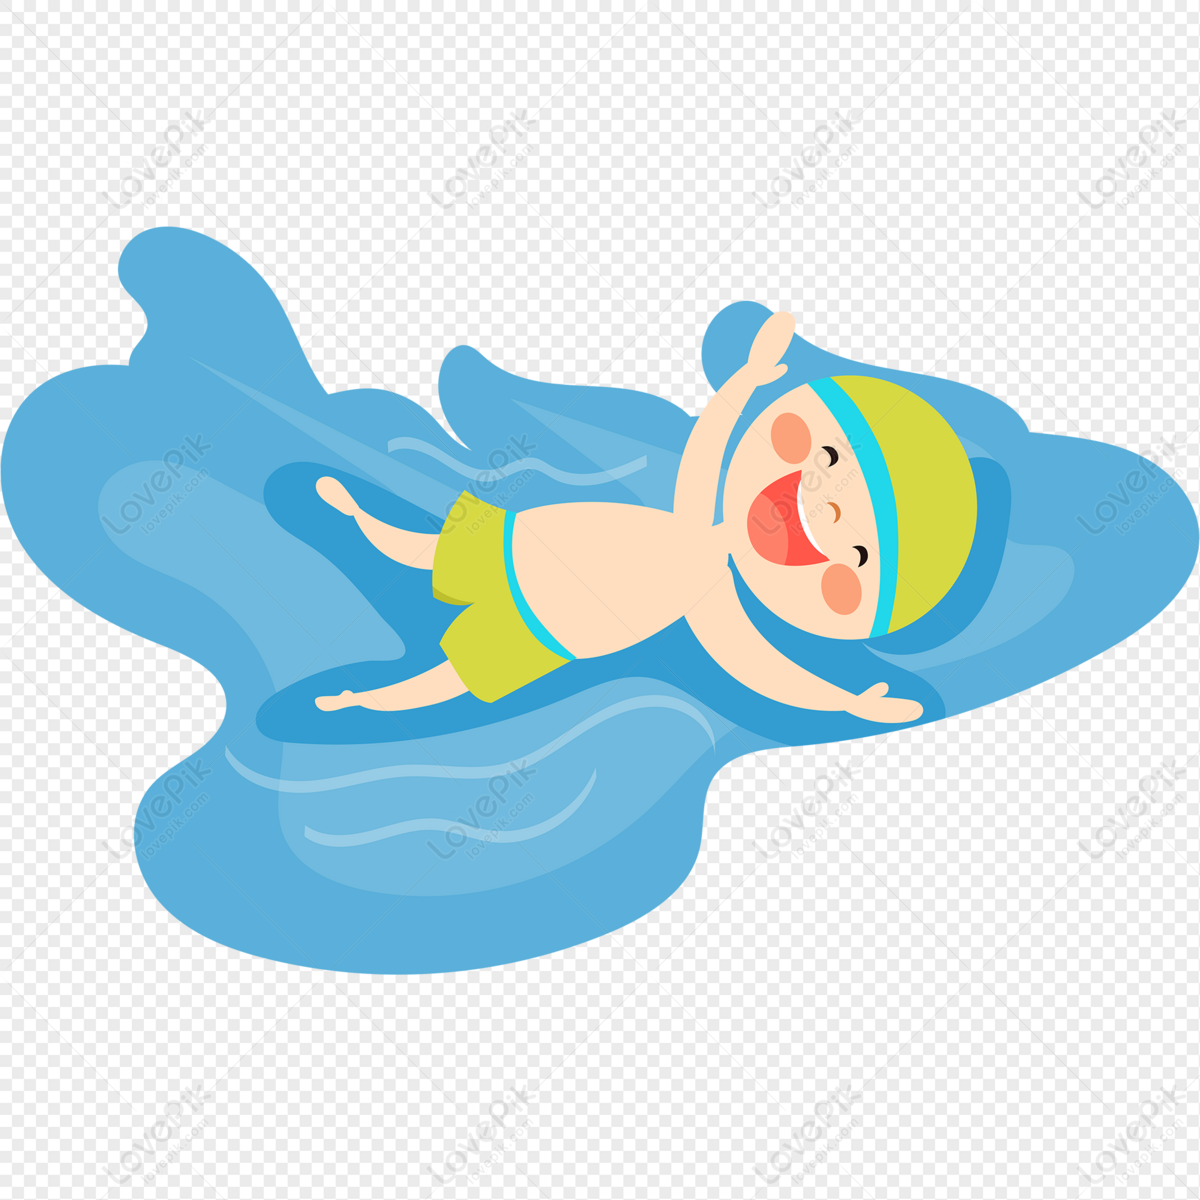 Children Swimming PNG White Transparent And Clipart Image For Free ...